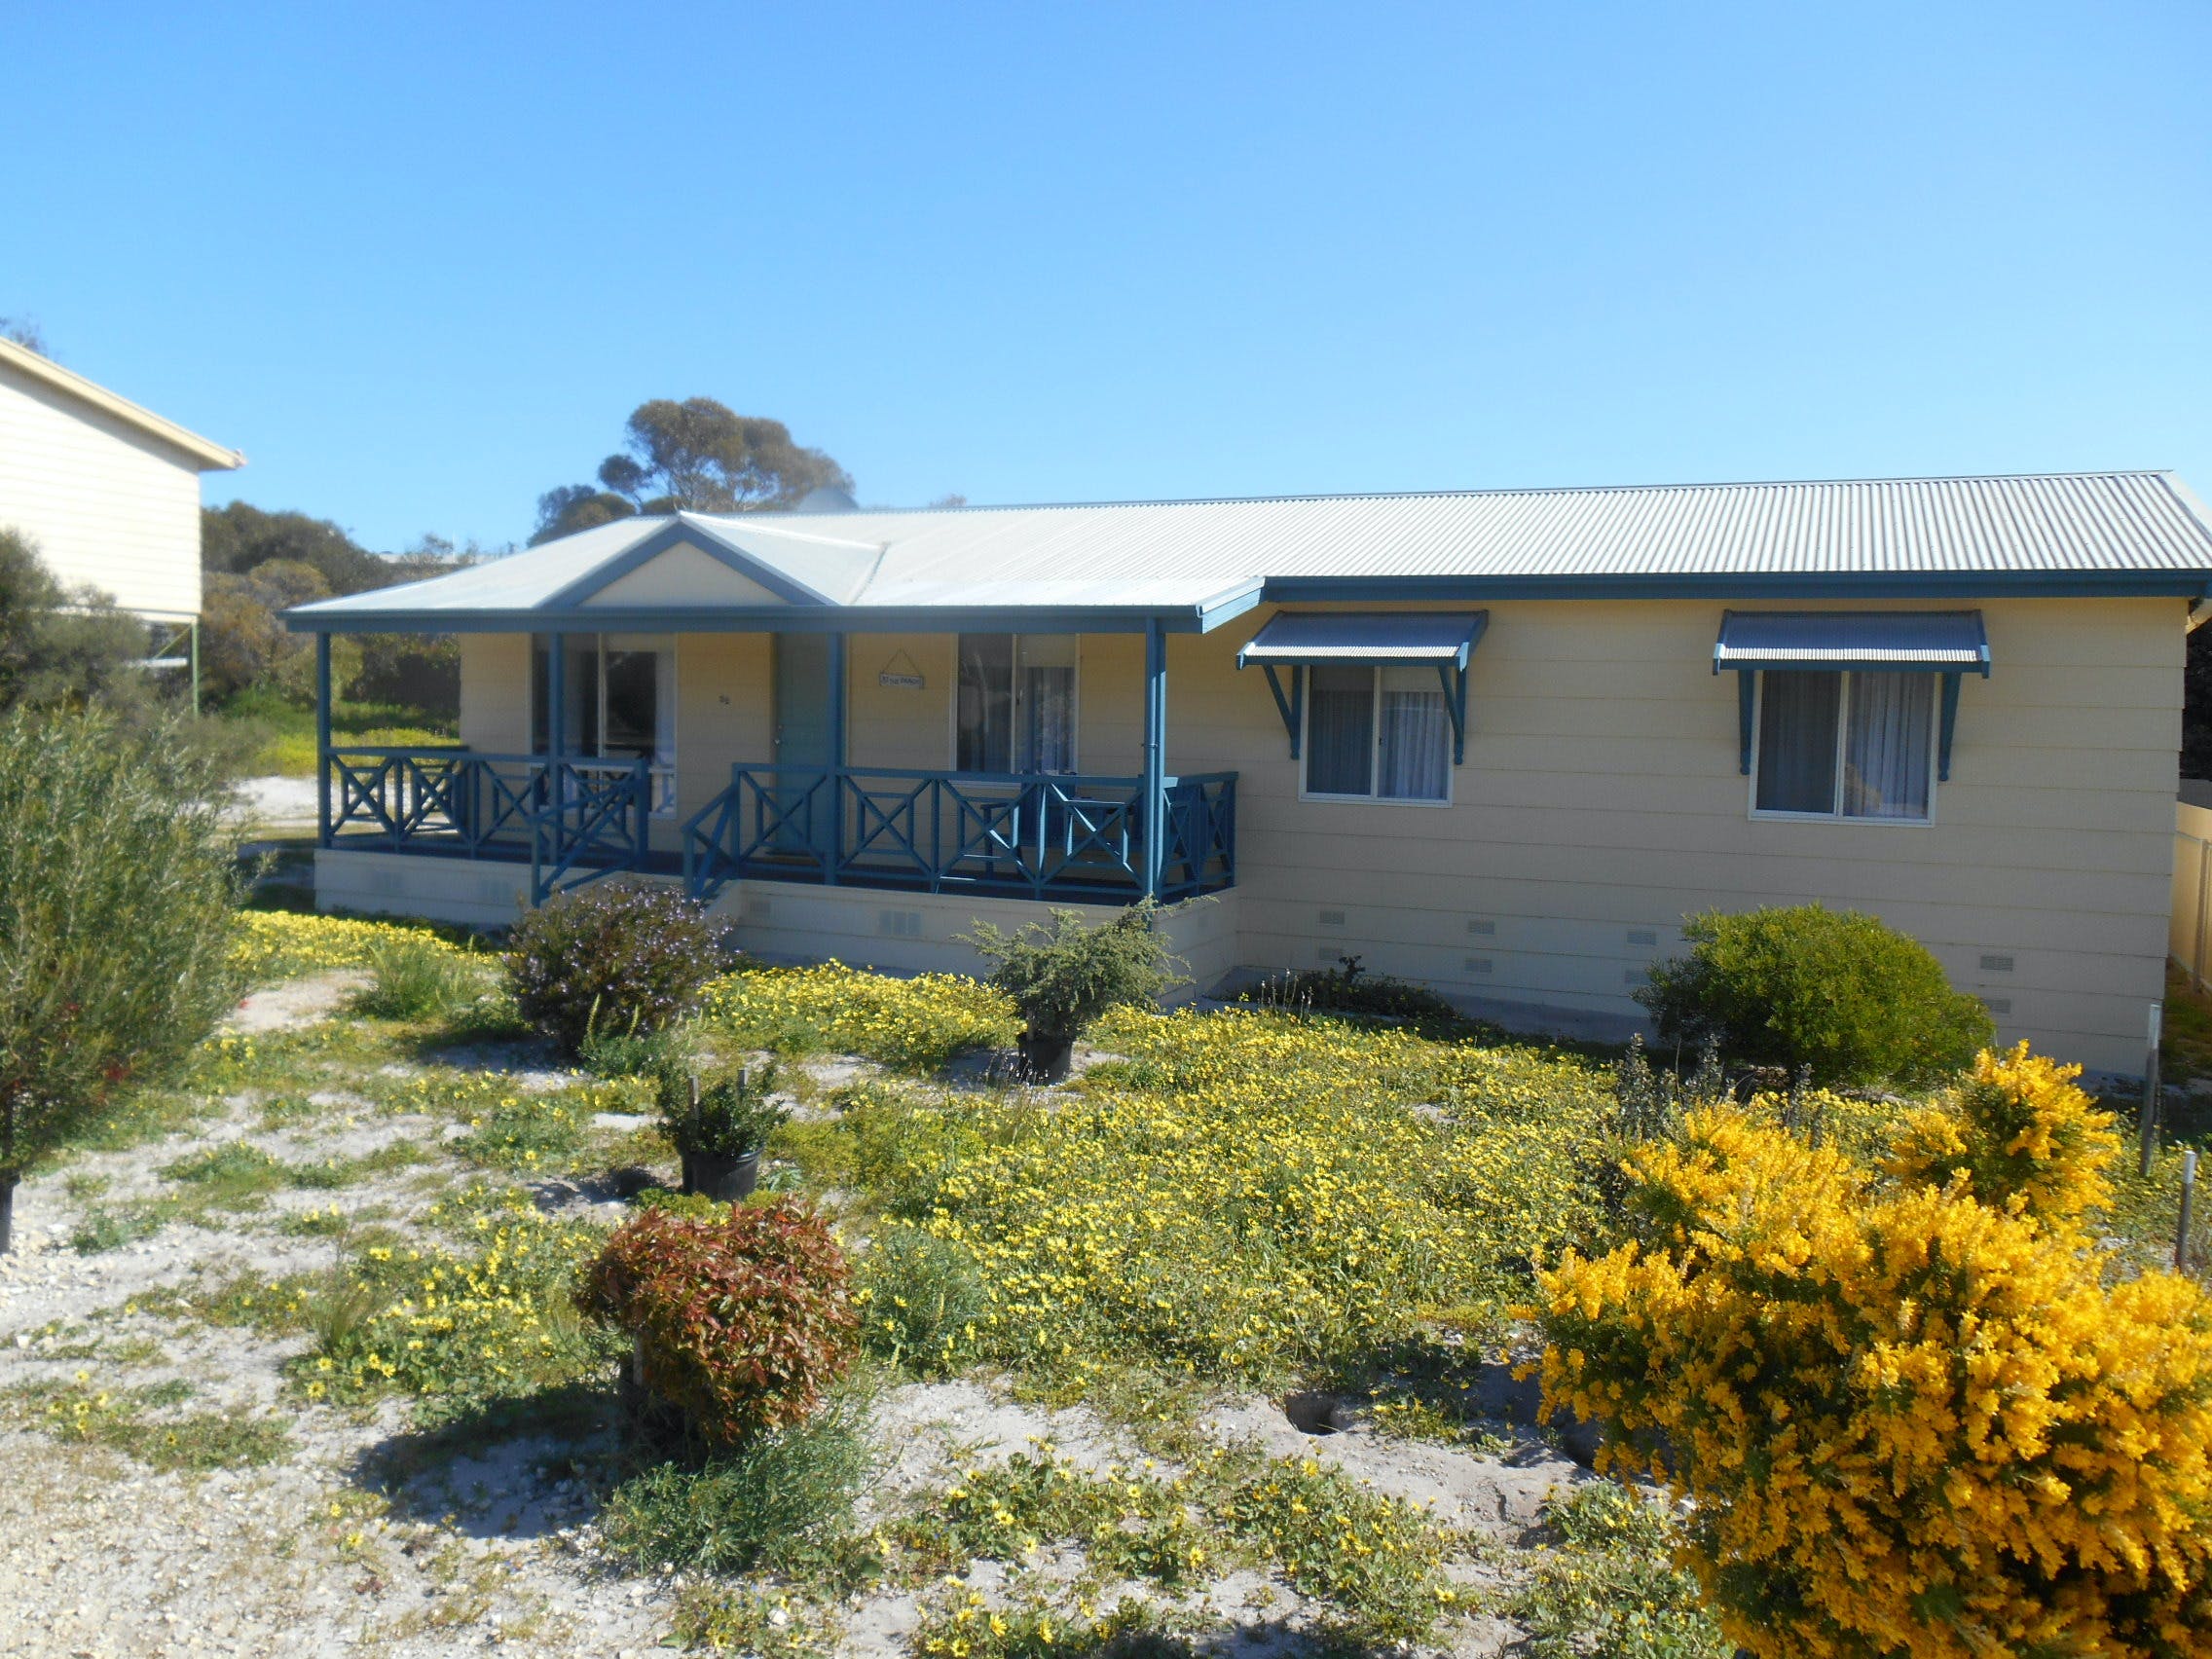 At the Beach - Port Augusta Accommodation